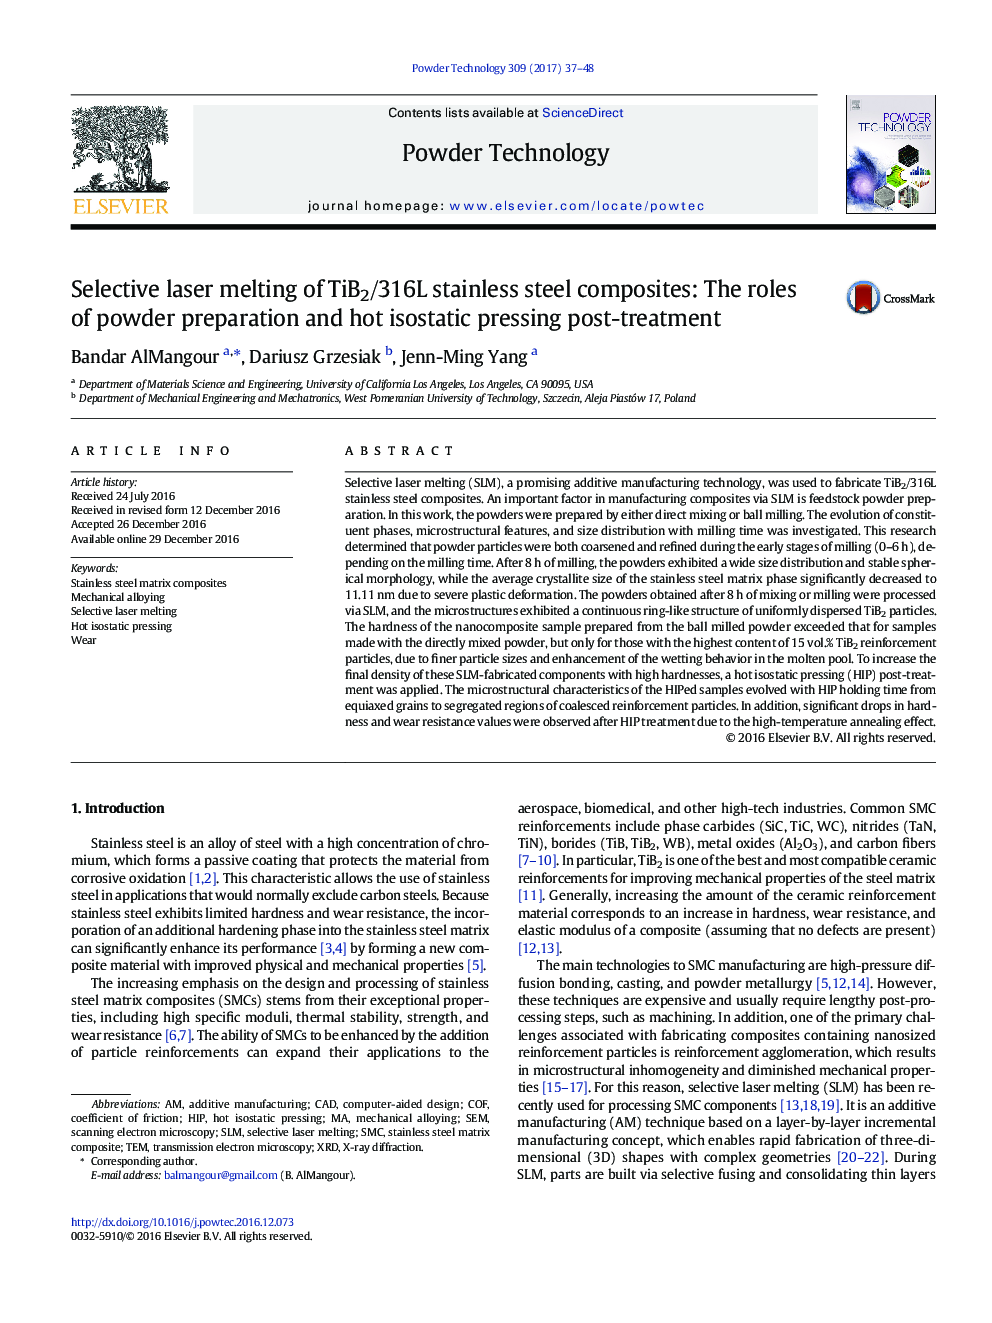 Selective laser melting of TiB2/316L stainless steel composites: The roles of powder preparation and hot isostatic pressing post-treatment